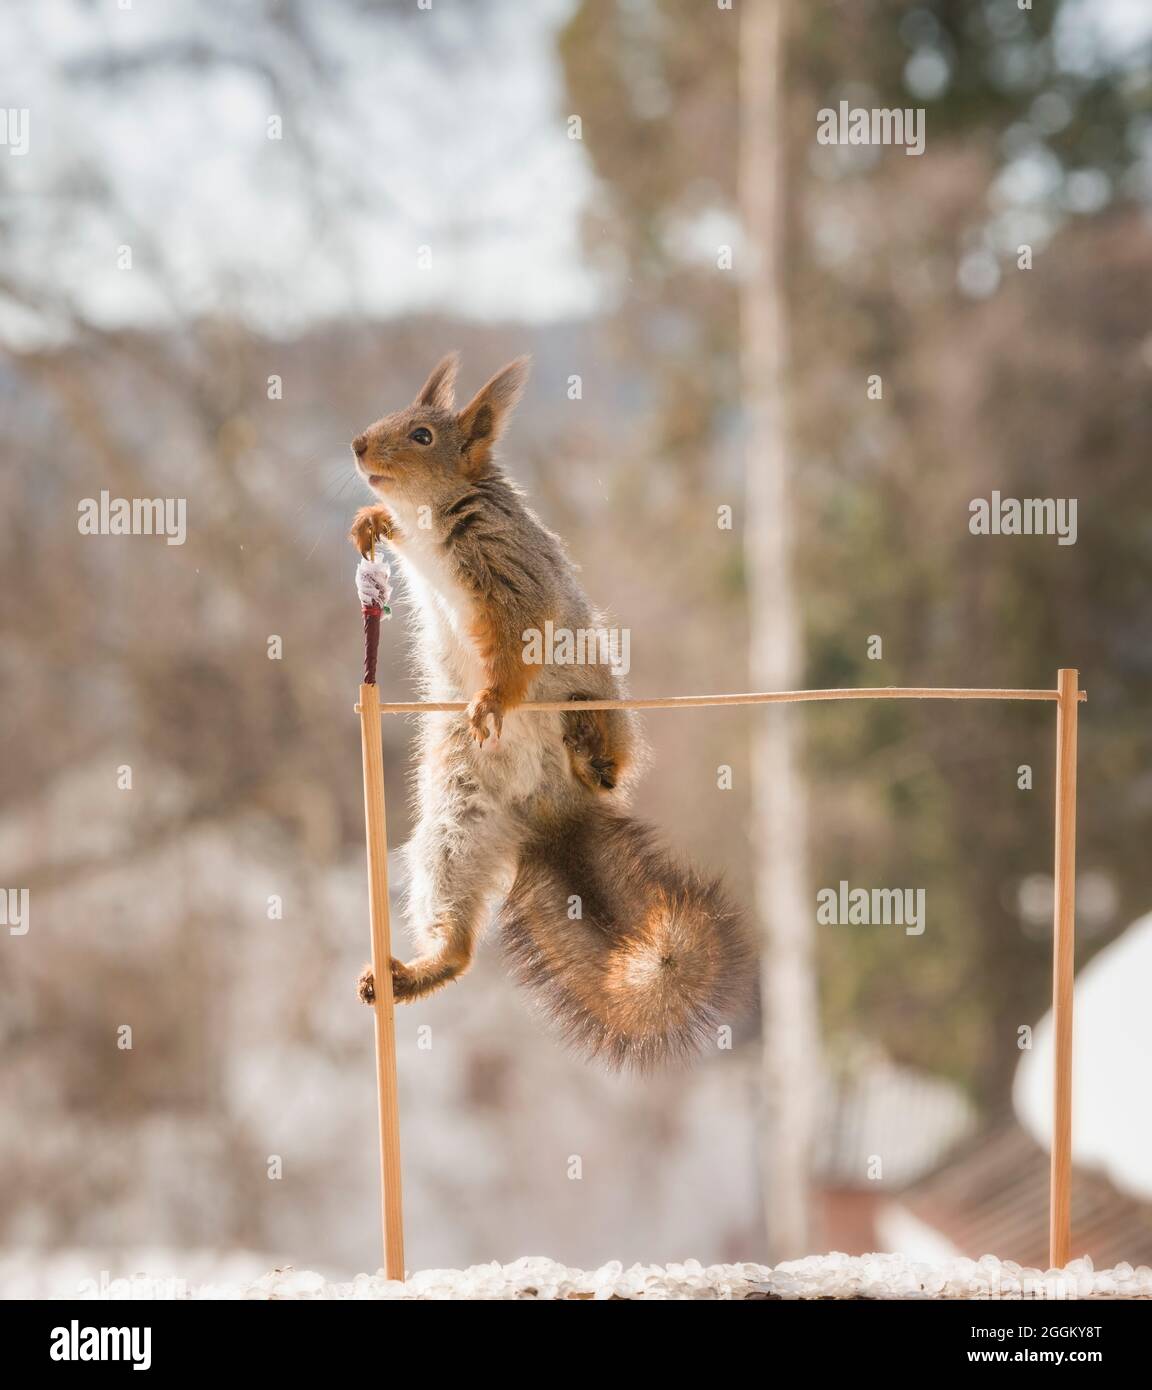 red squirrel is holding a umbrella on washing line Stock Photo